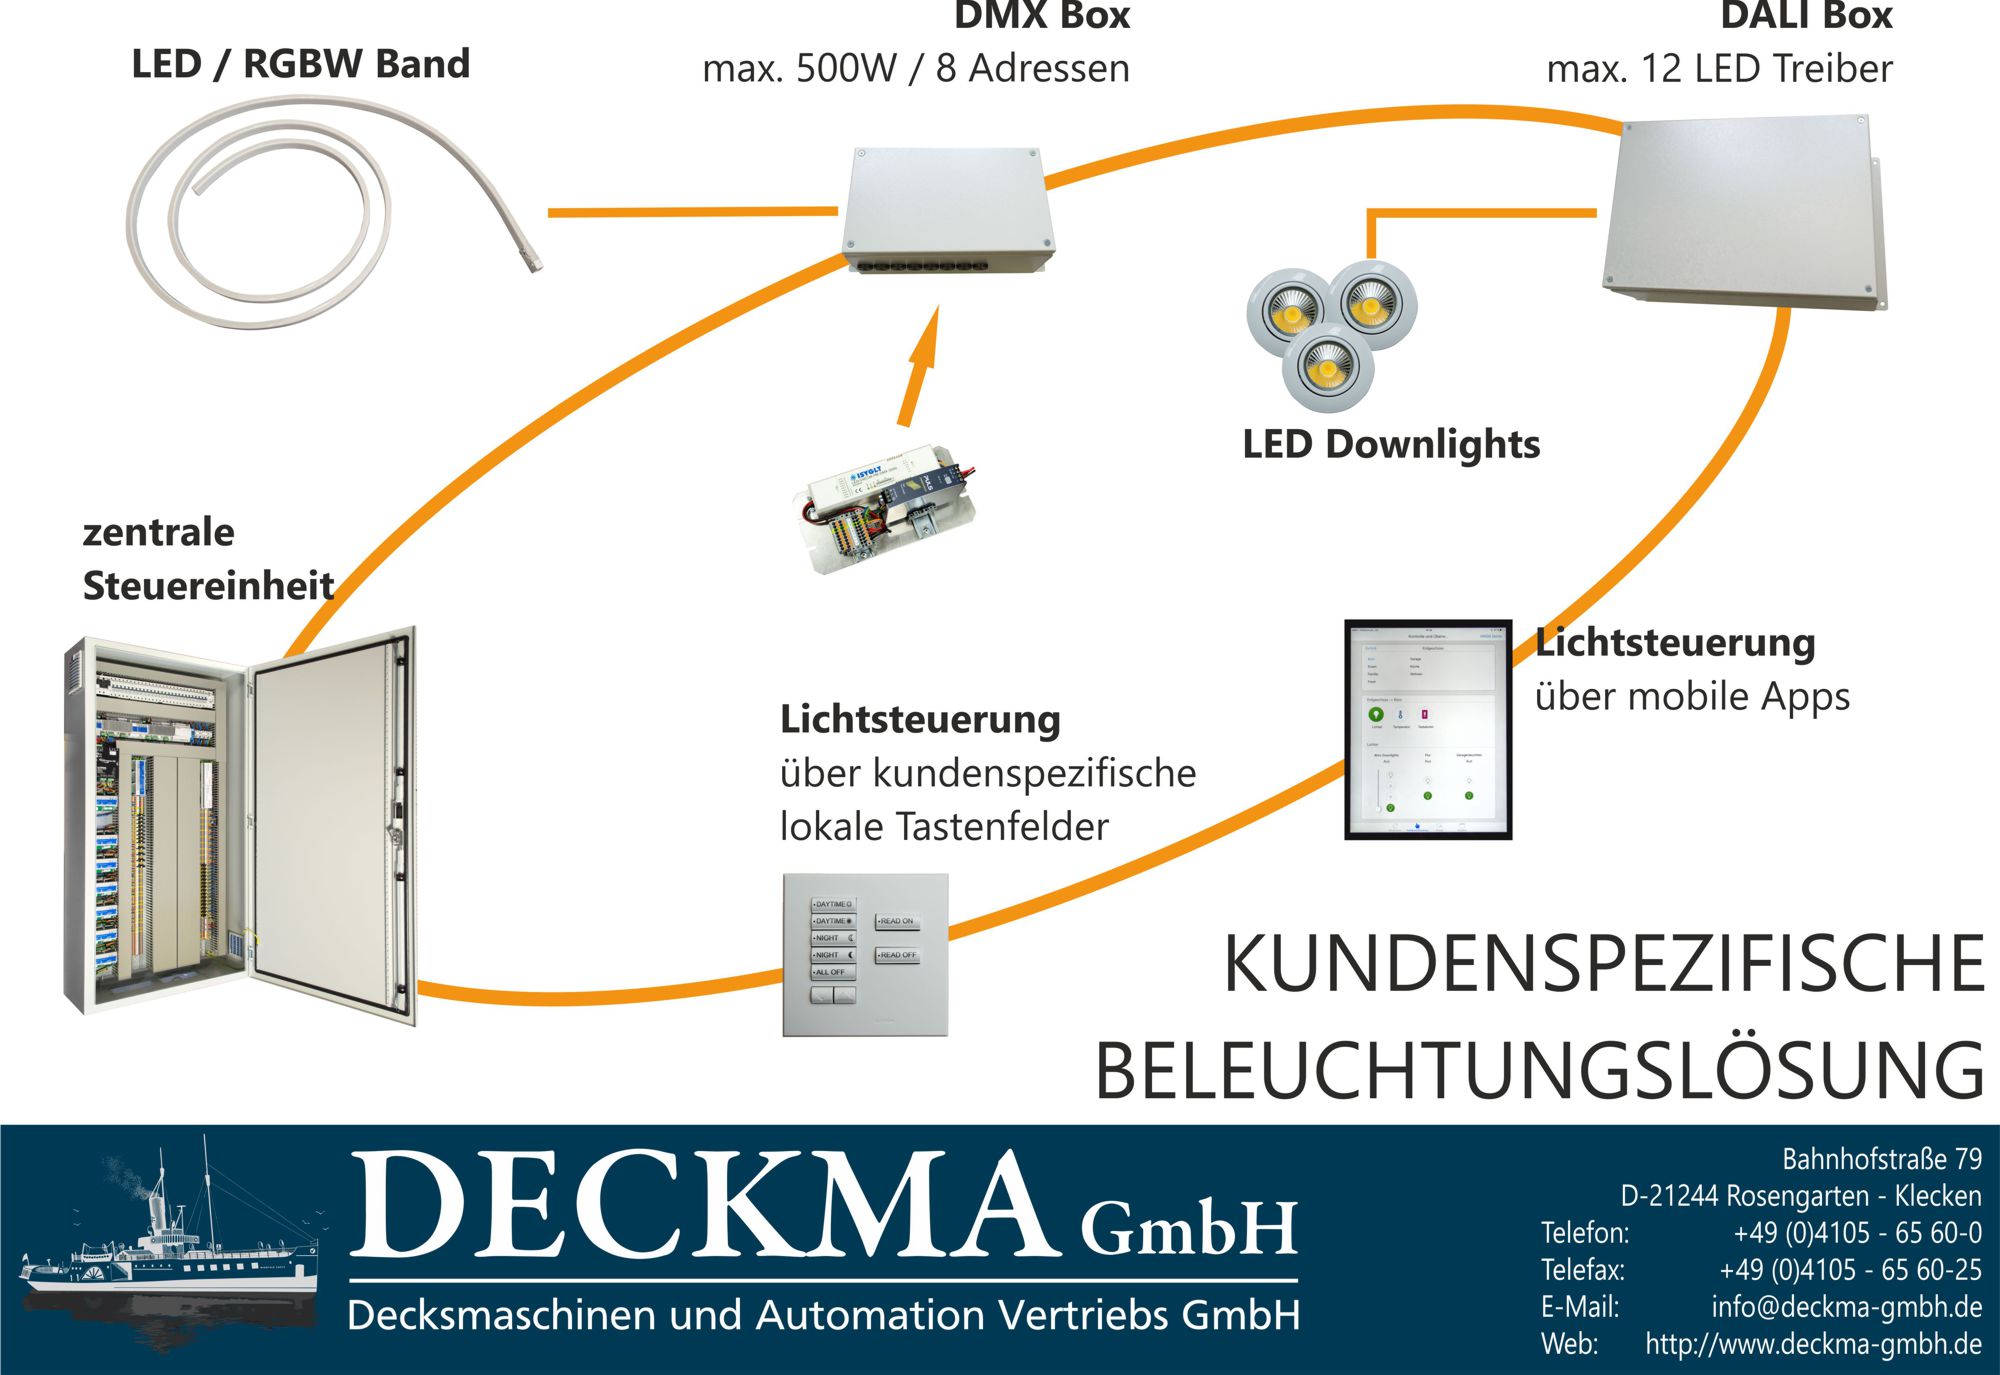 Deckma GmbH - Project engineering and manufacture of dimmer system